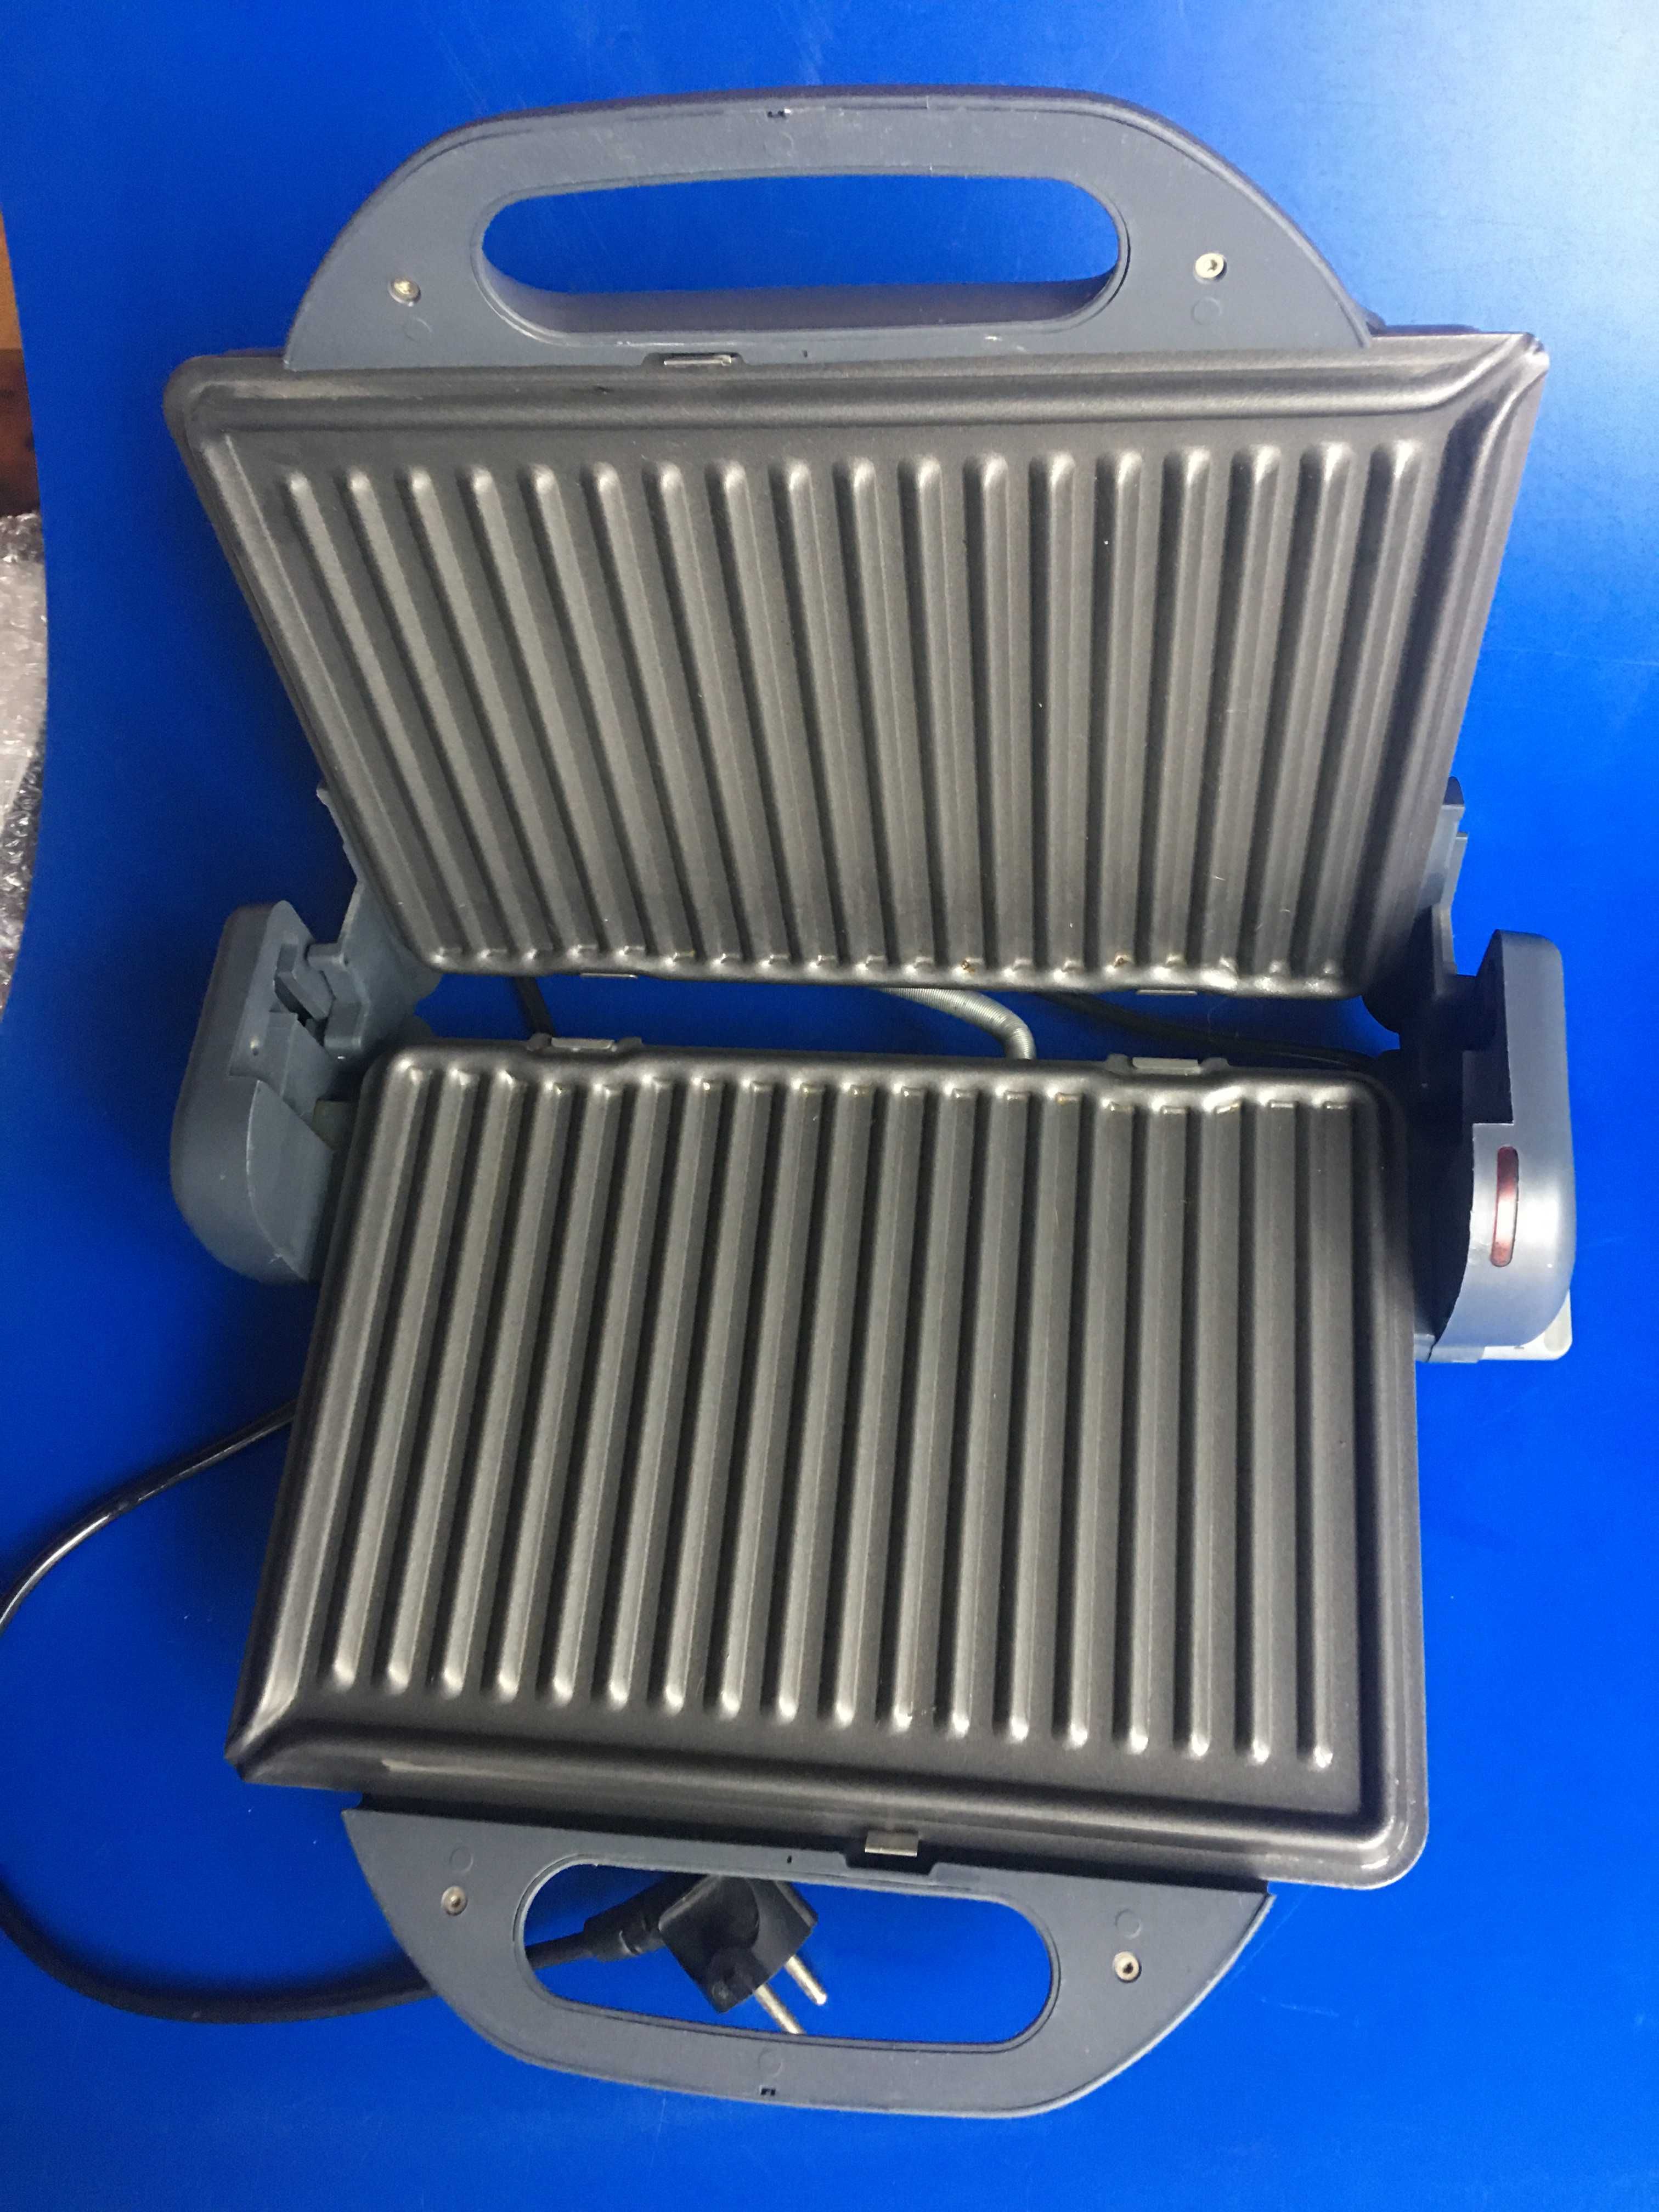 Grill Philips HDF 4407